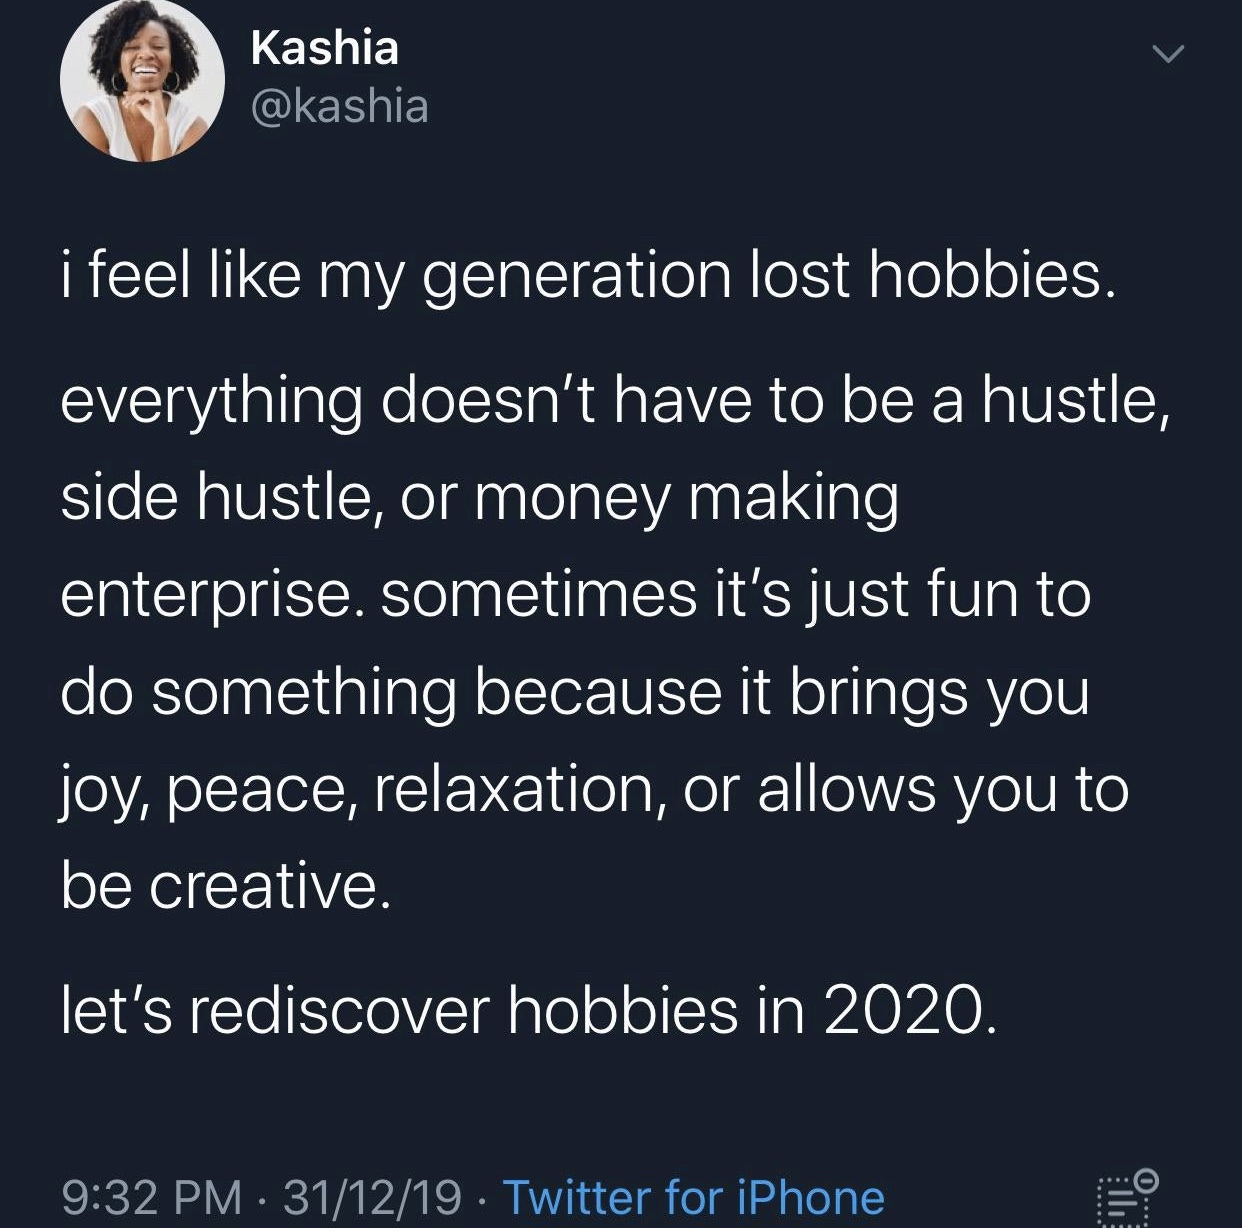 2020 memes - atmosphere - Kashia i feel my generation lost hobbies. everything doesn't have to be a hustle, side hustle, or money making enterprise. sometimes it's just fun to do something because it brings you joy, peace, relaxation, or allows you to be 